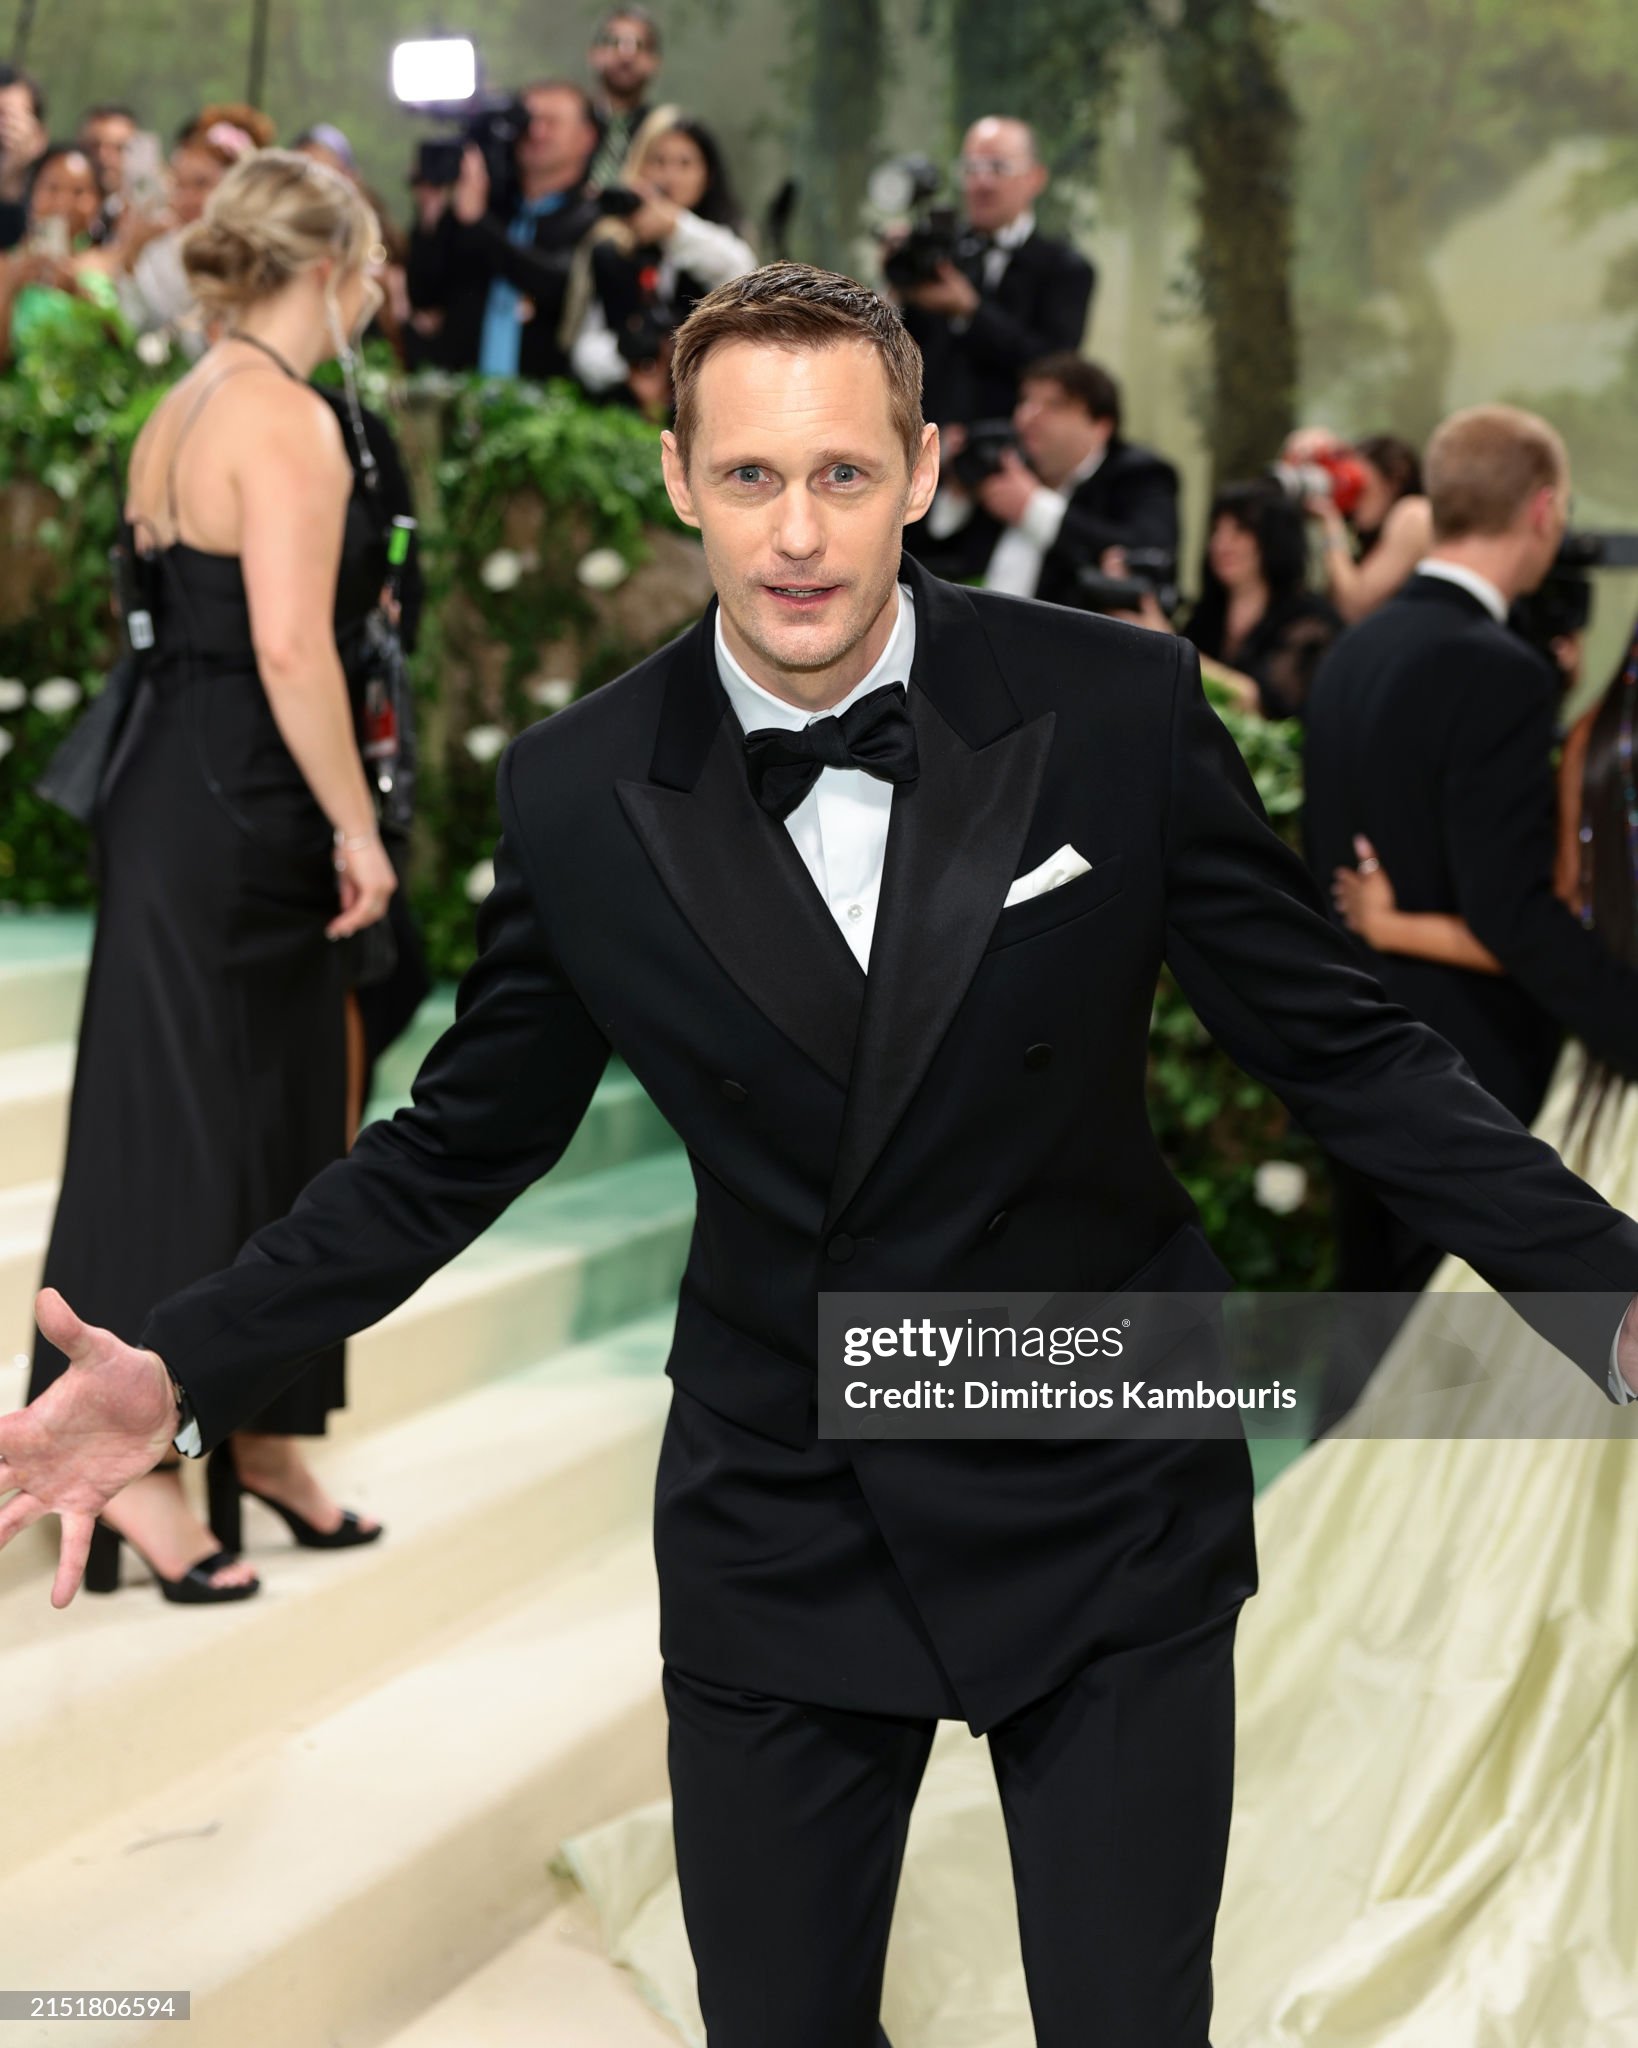 gettyimages-2151806594-2048x2048.jpg